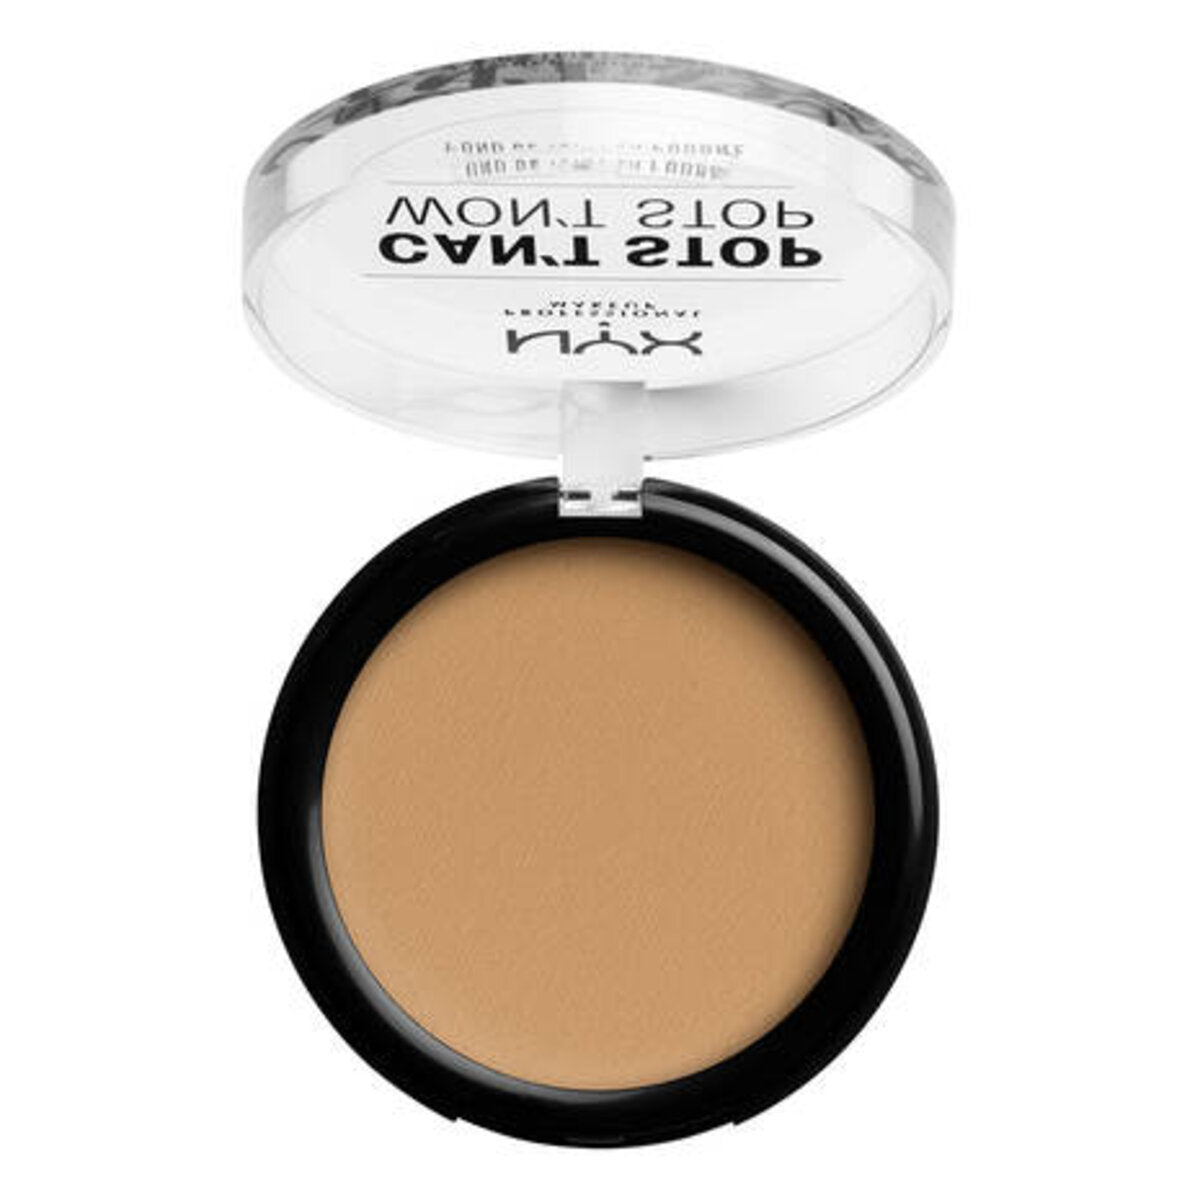 BASE EN POLVO CAN'T STOP WON'T STOP - OUTLET NYX PROFESSIONAL MAKEUP